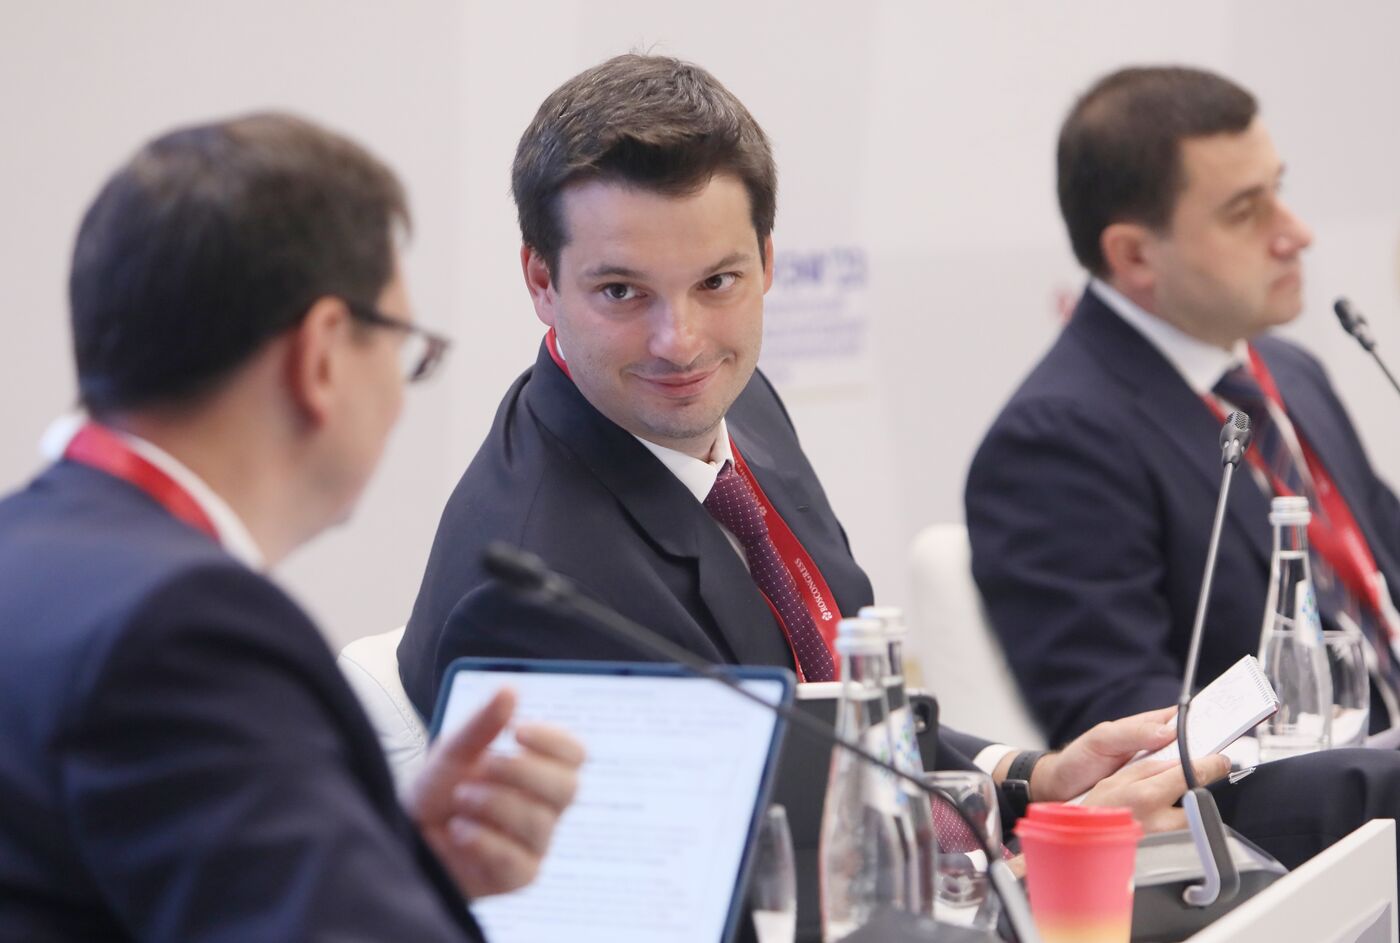 SPIEF-2023. Taking Inventories of Territories: New Opportunities in the Use of Spatial Data